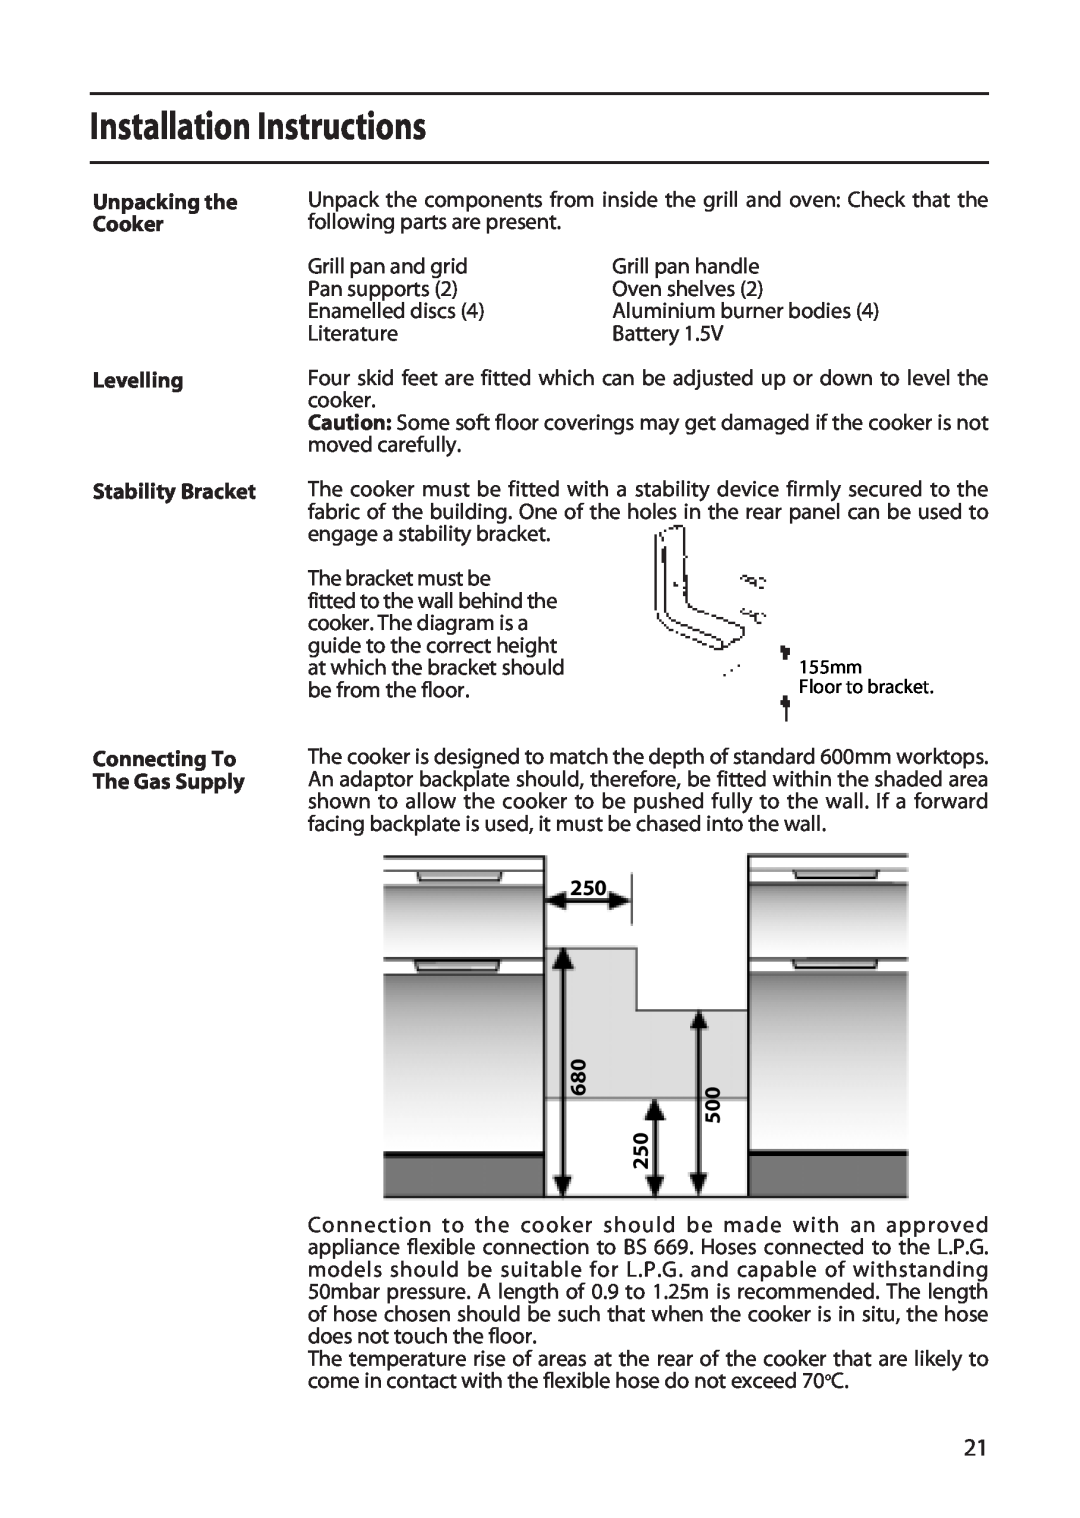 Creda X152 installation instructions Installation Instructions, Unpacking the Cooker Levelling Stability Bracket, 680680 